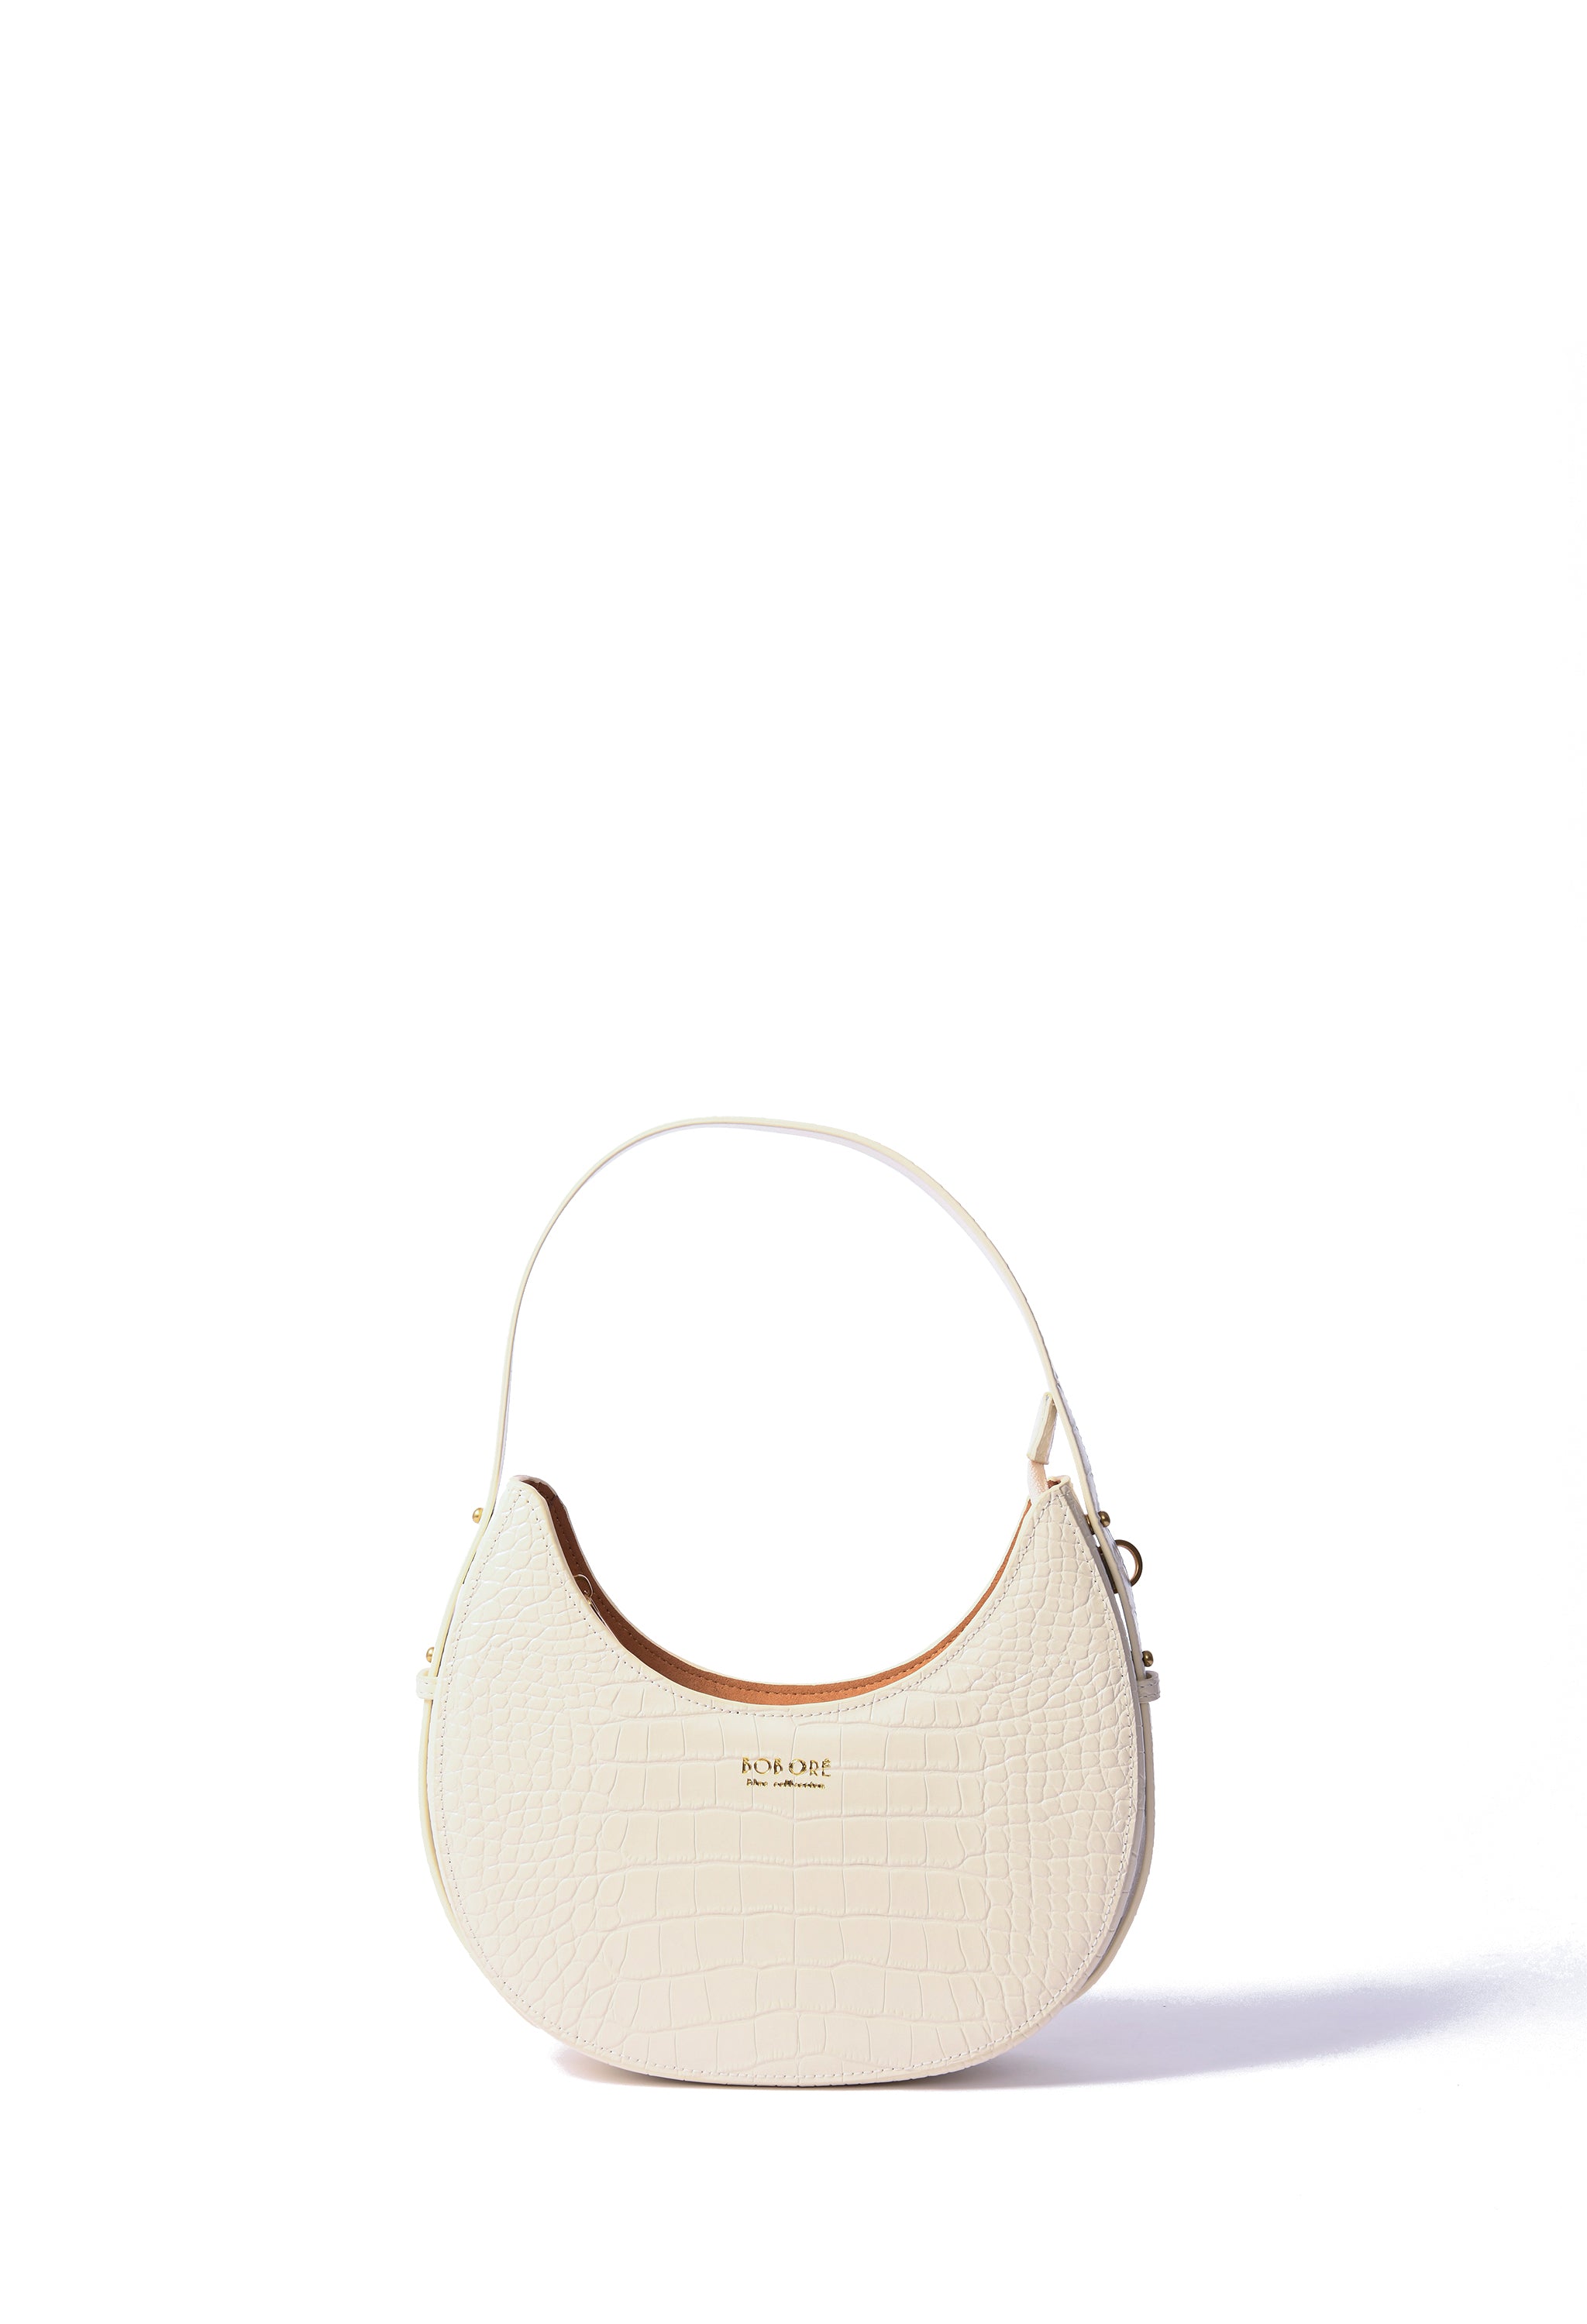 Naomi Moon Bag in croco embossed leather, White